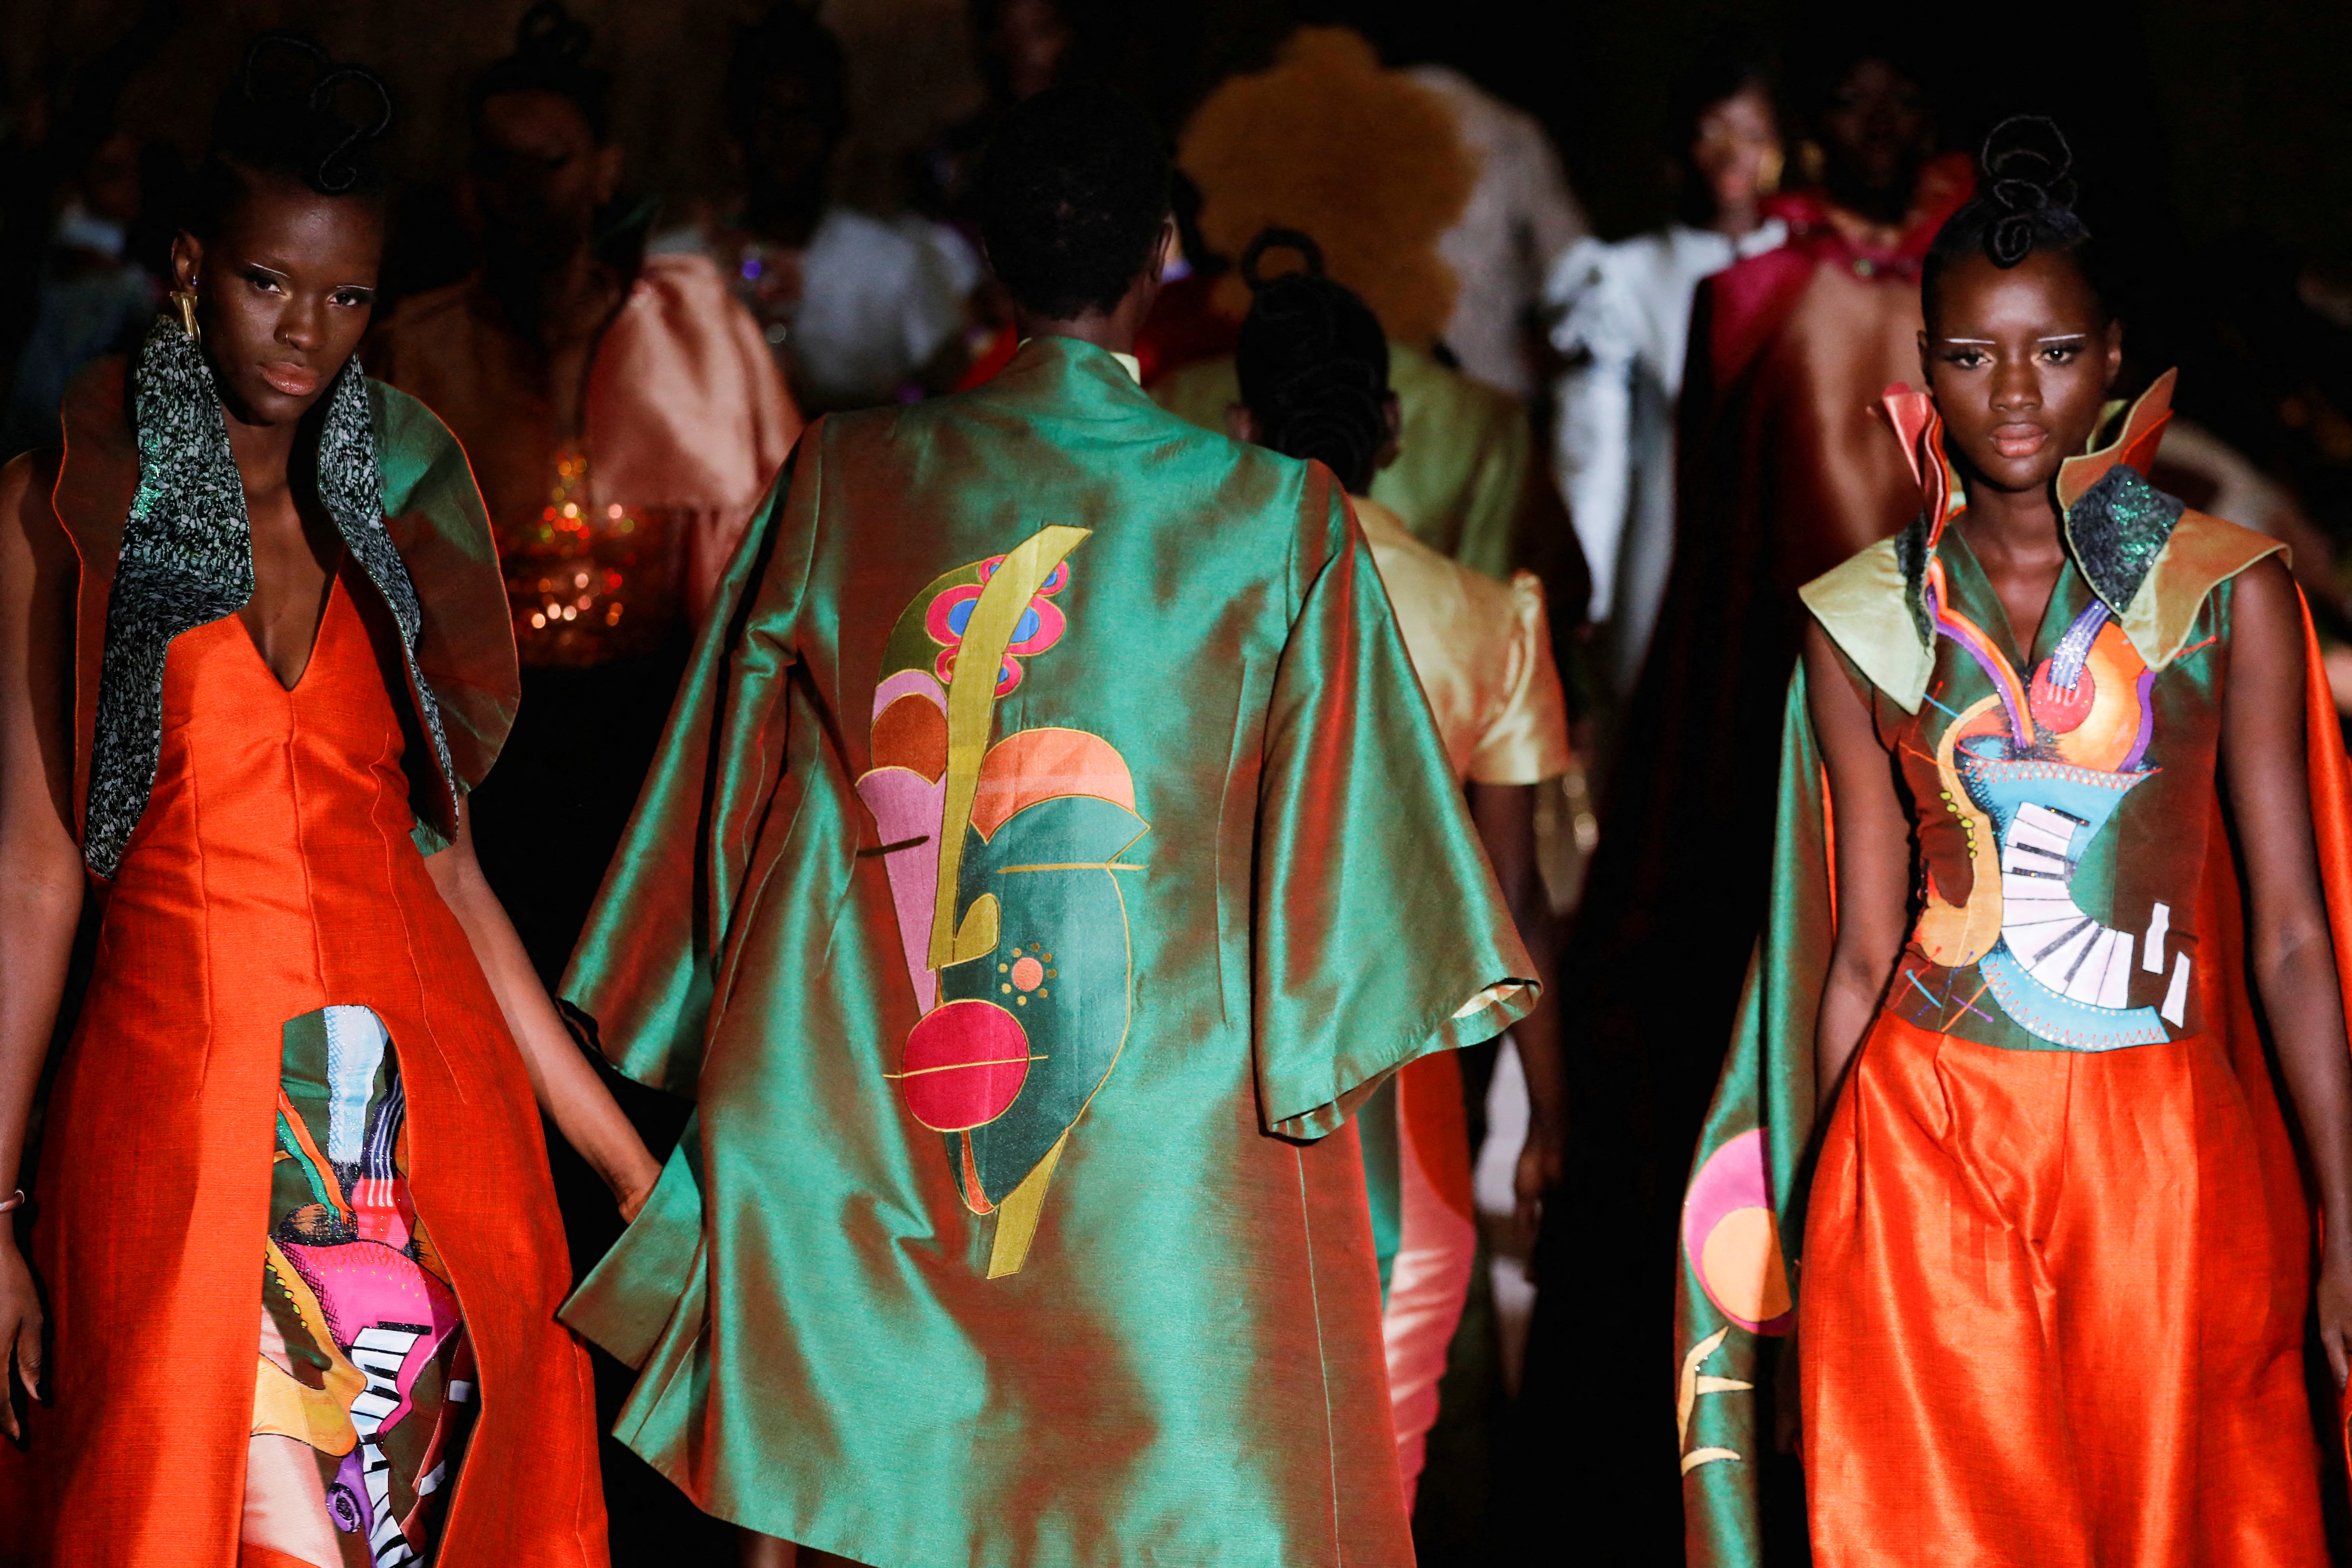 Models present creations by Al Gueye designer during the 19th annual Dakar Fashion Week at the Baobad forest, in Mbour